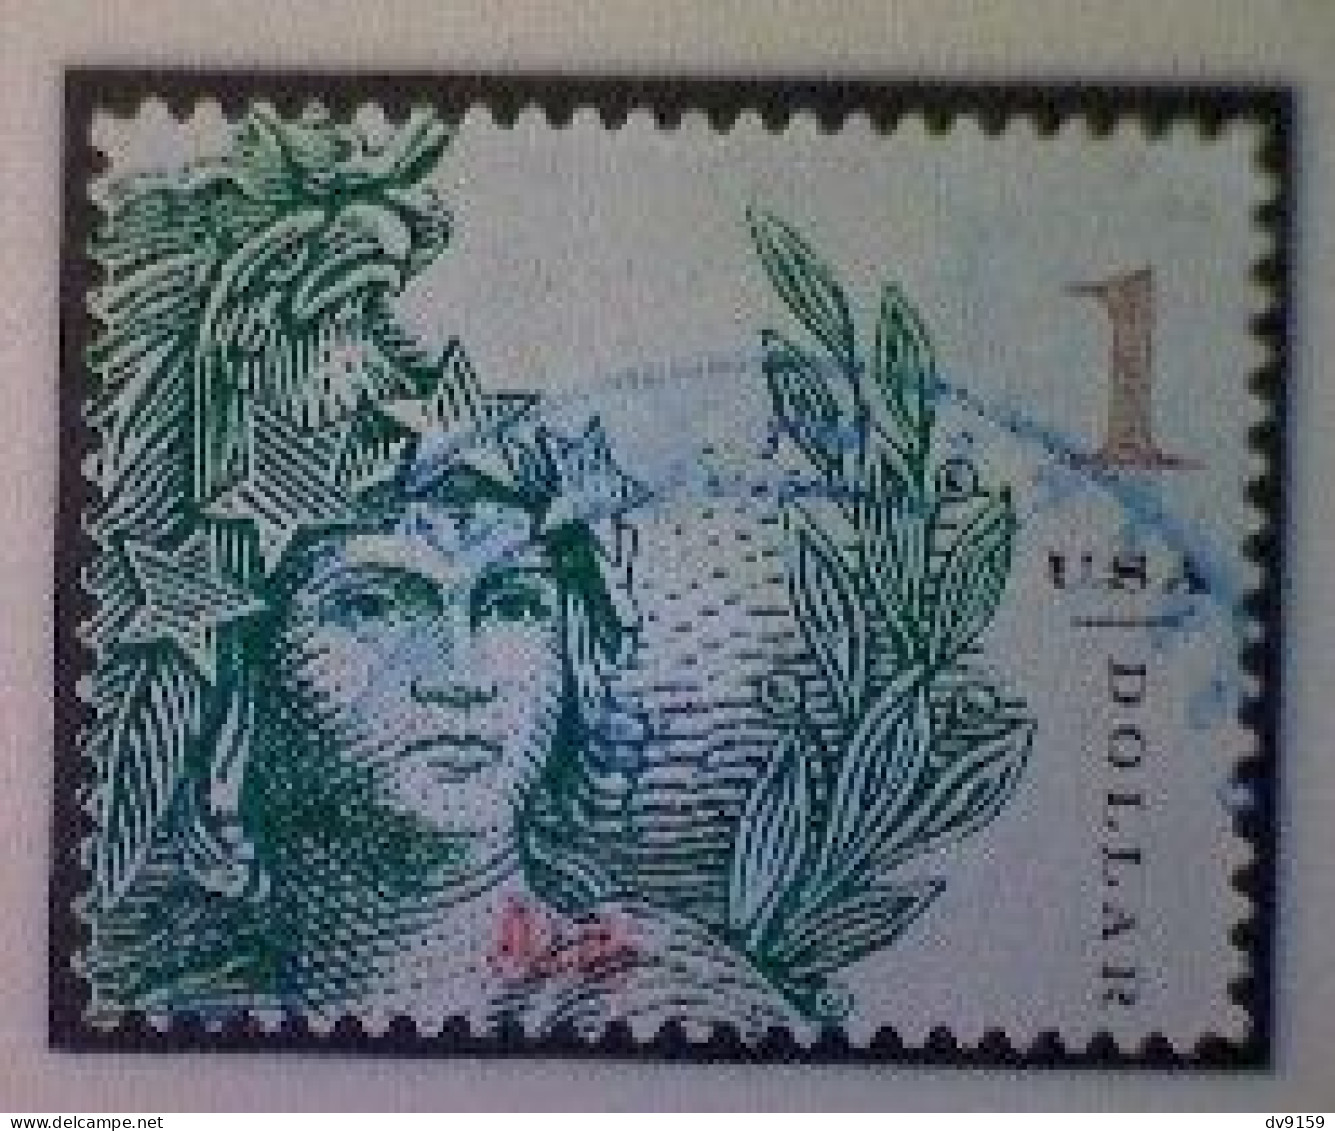 United States, Scott #5295, Used(o), 2018, Statue Of Freedom, $1.00, Emerald - Used Stamps